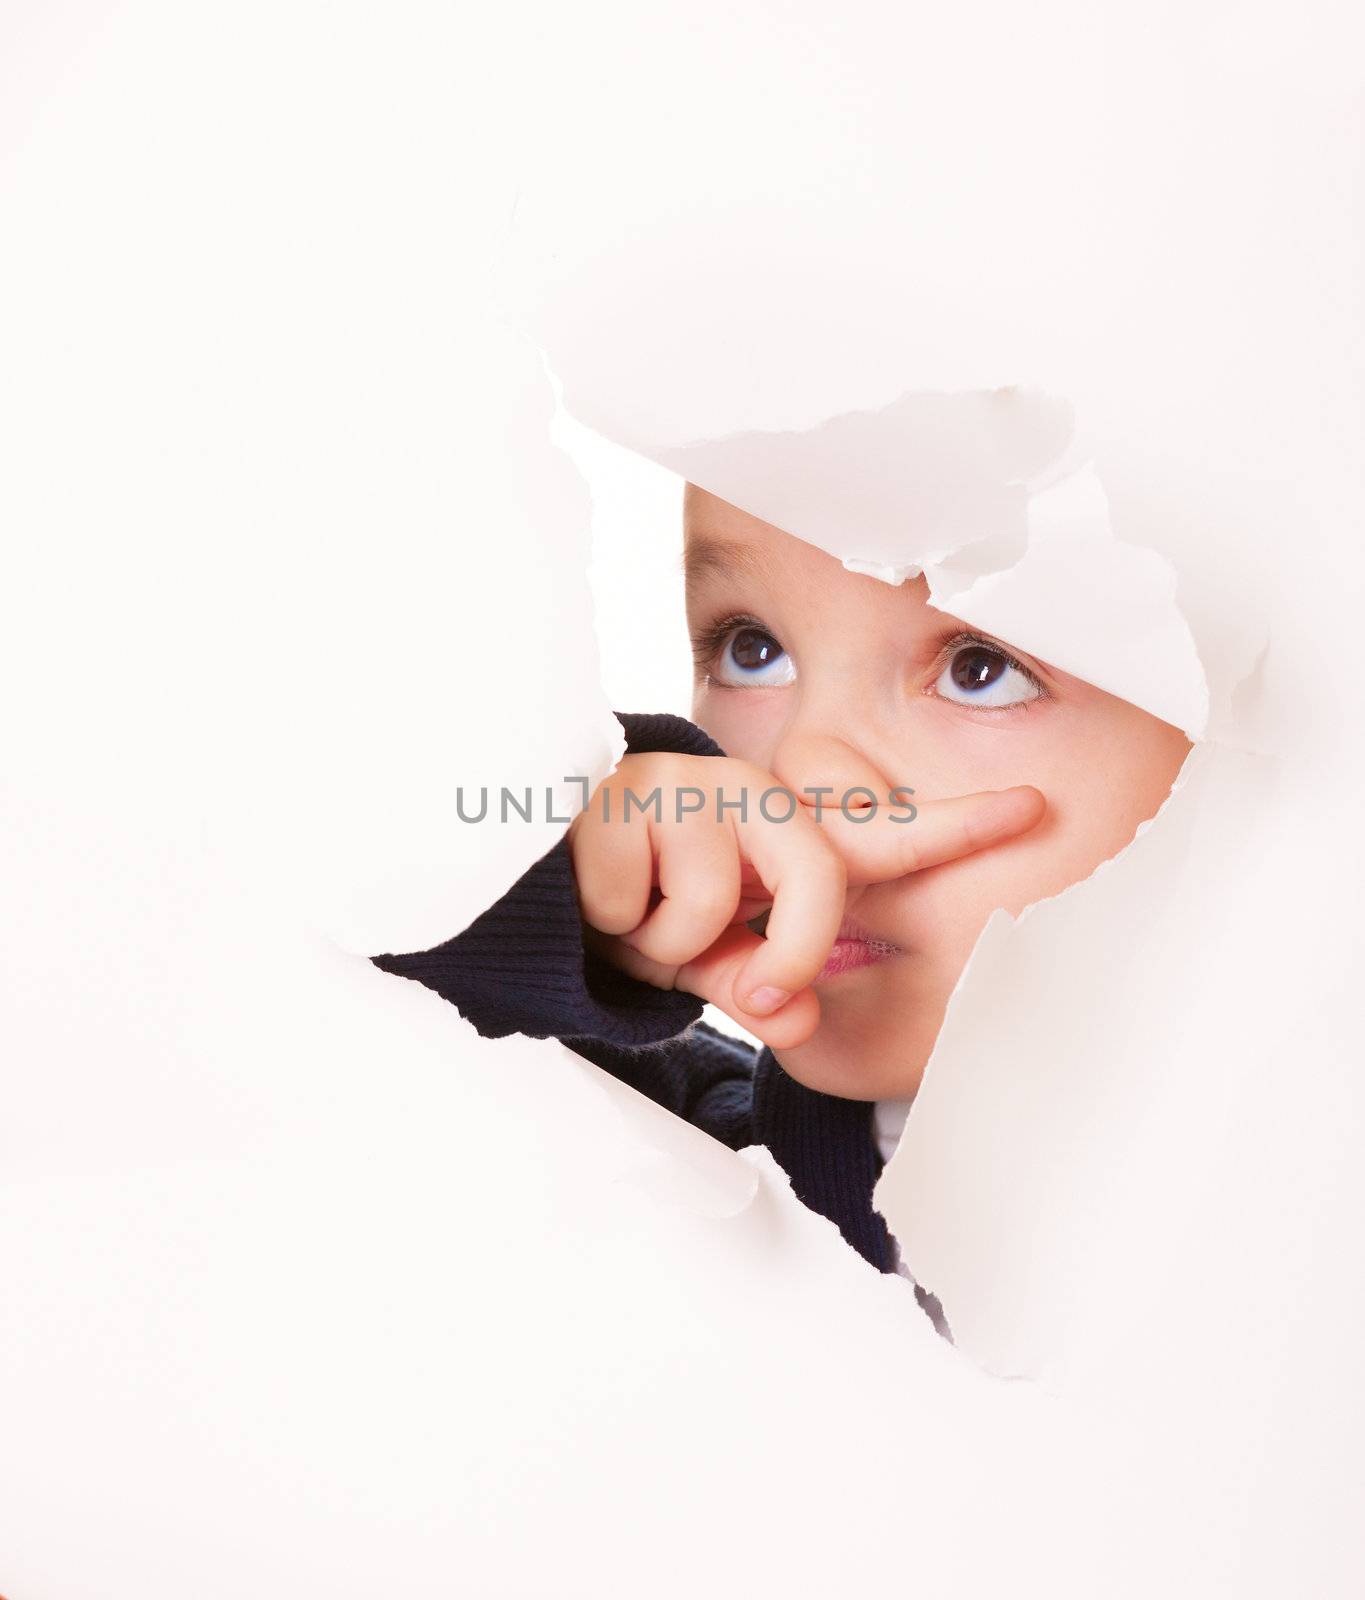 Guilty kid looks up through a hole in white paper